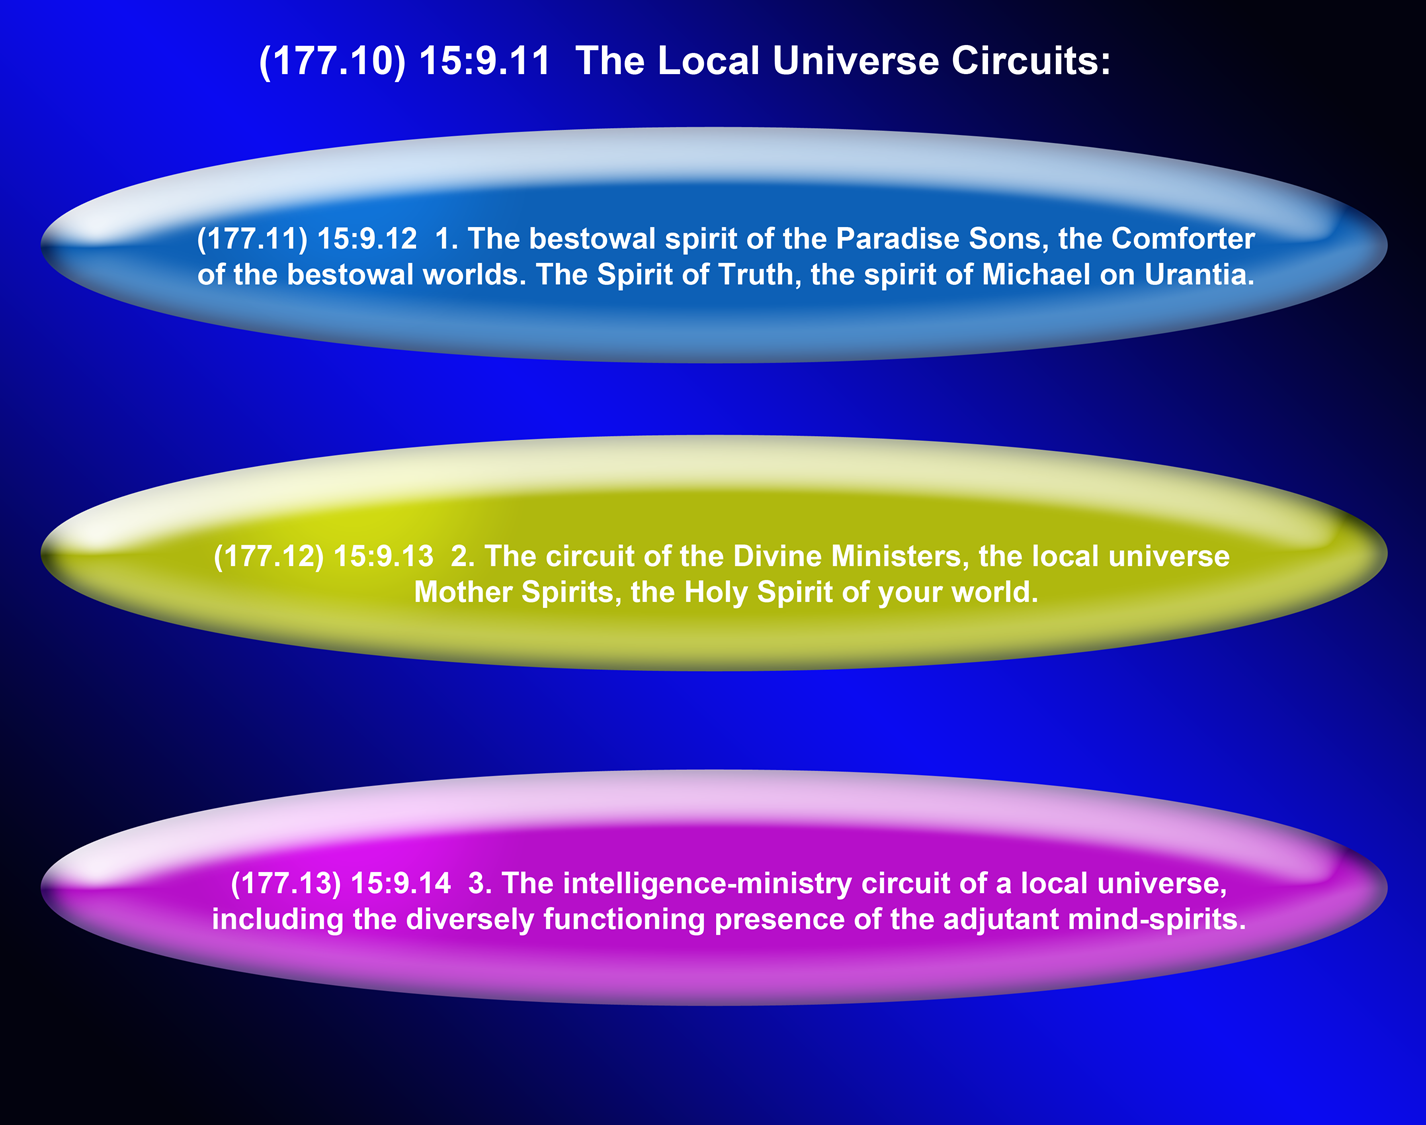 The Local Universe Circuits